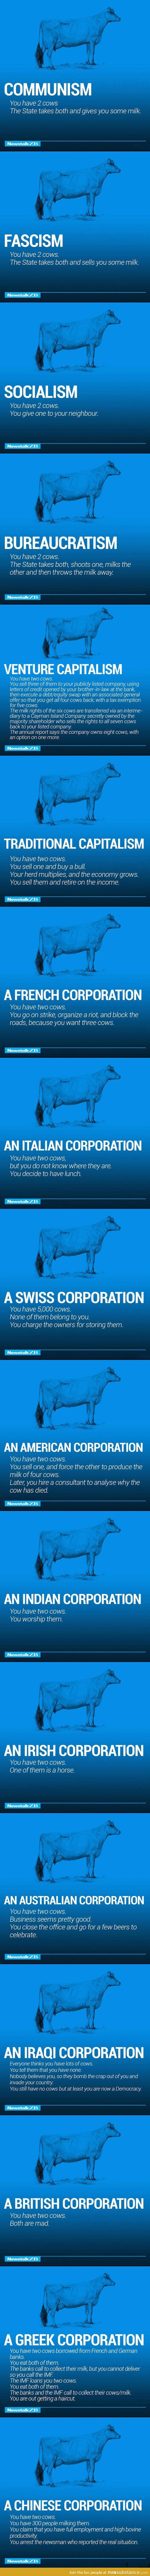 The World's Economy Explained With Just Two Cows